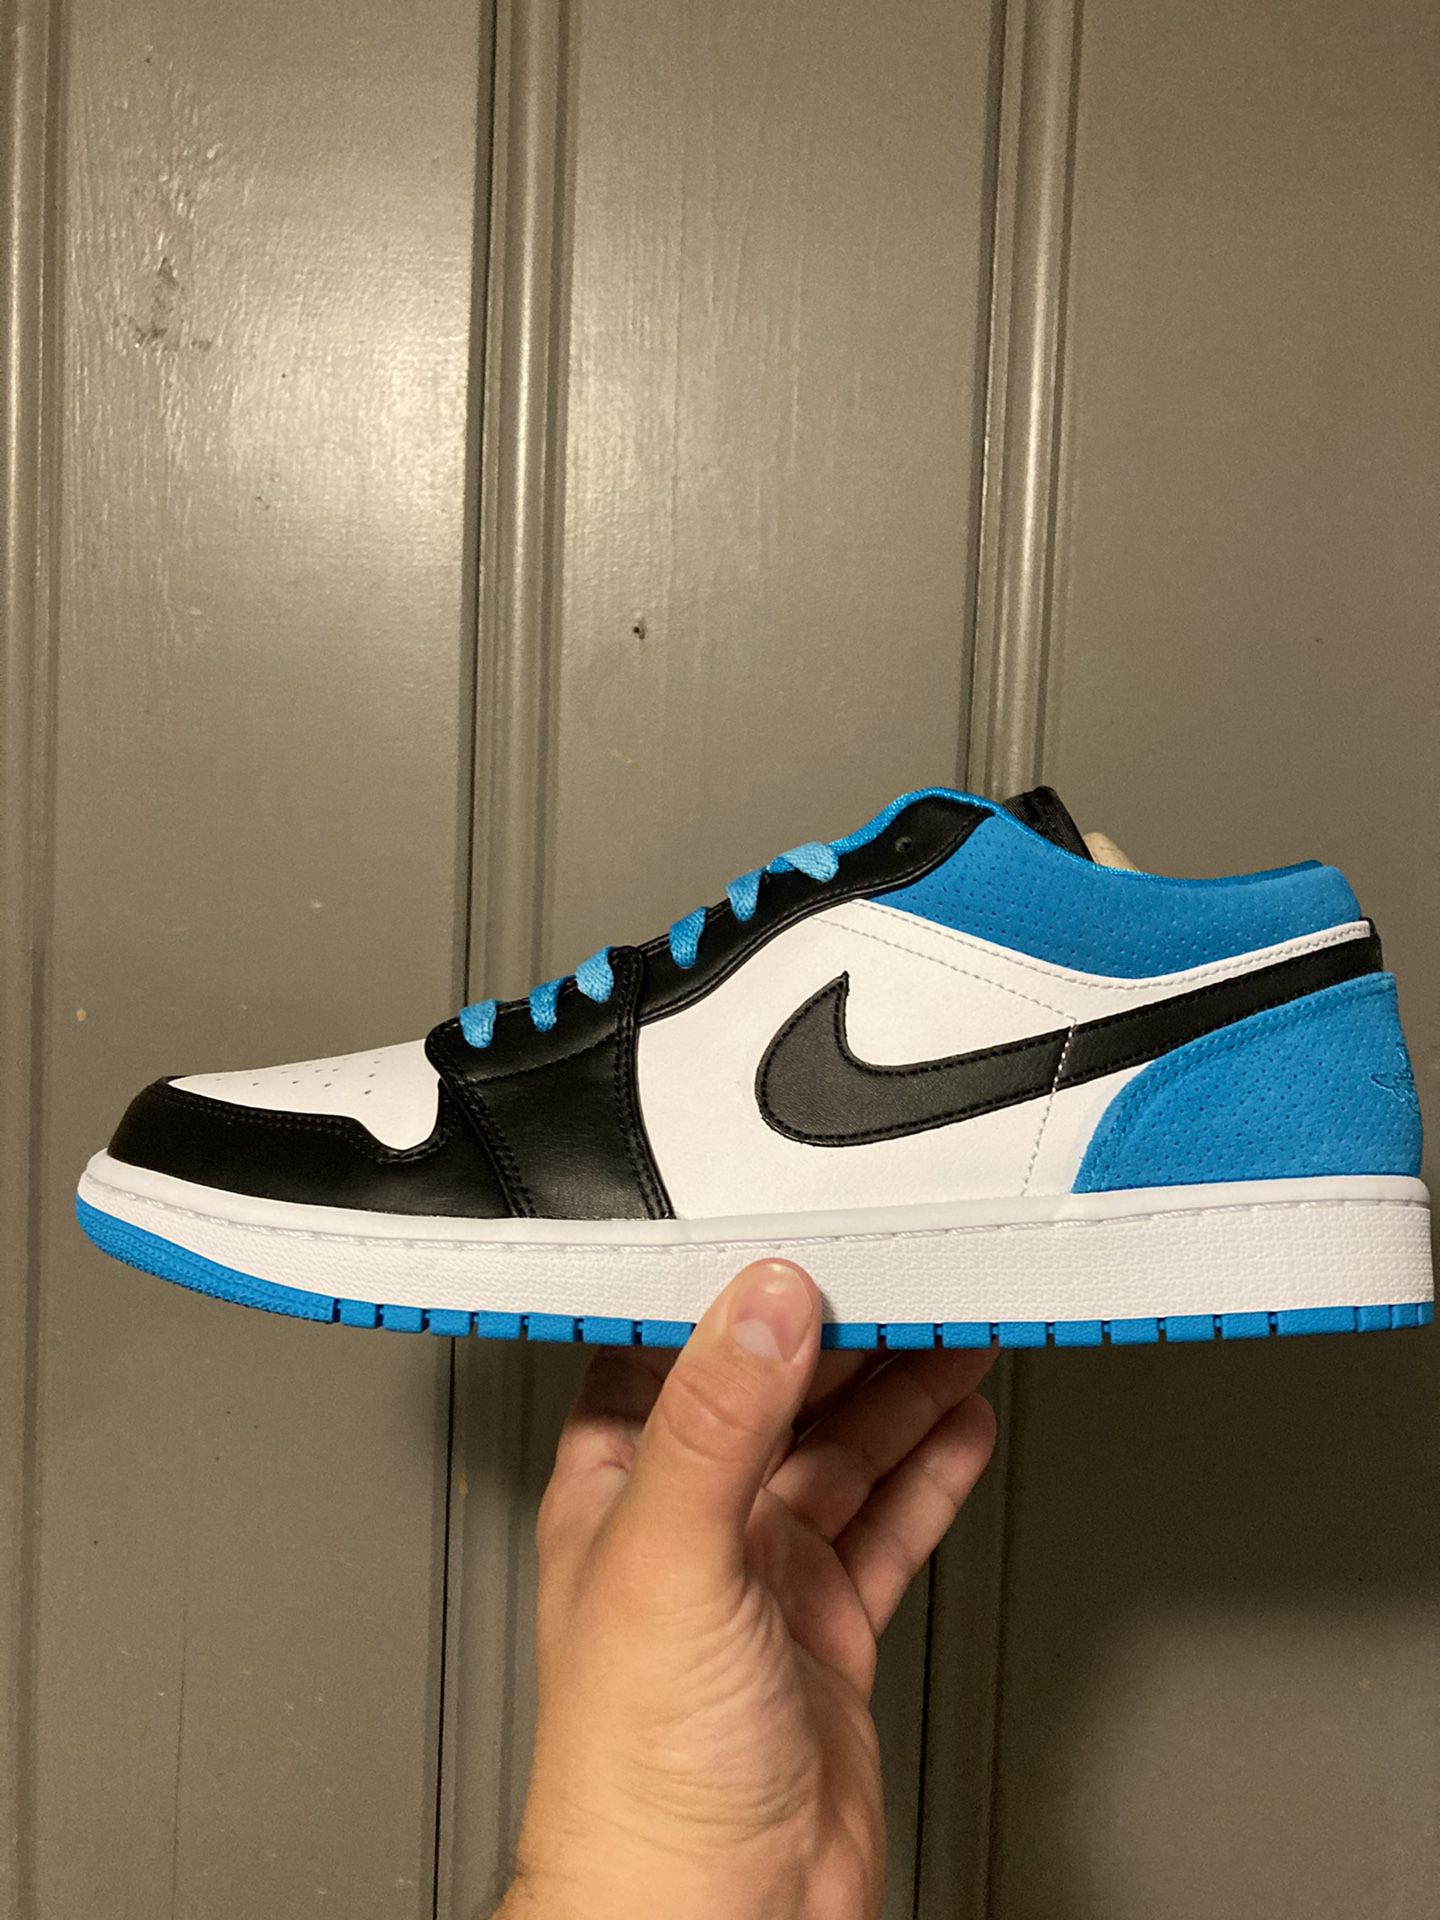 Jordan 1 low “Laser blue” size (11). In men’s worn 1x like new. With receipt $85. Firm. First come first served.